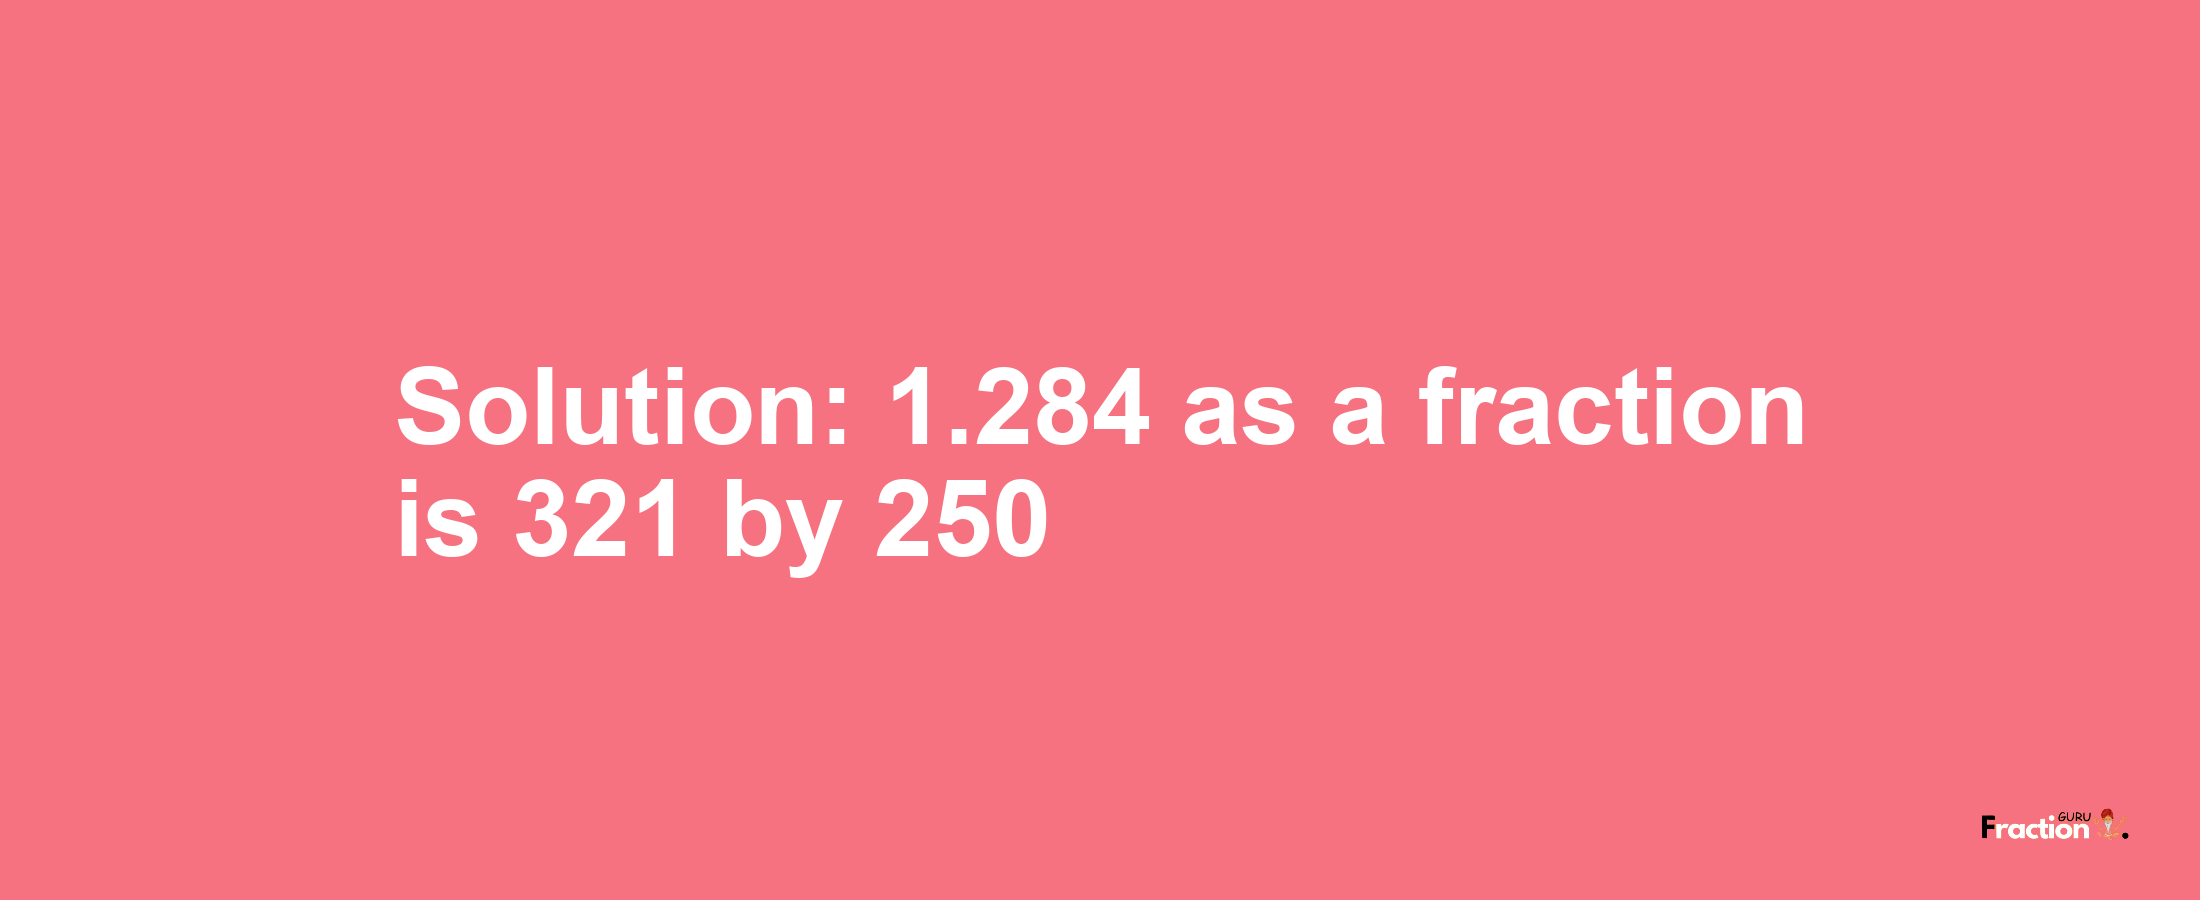 Solution:1.284 as a fraction is 321/250